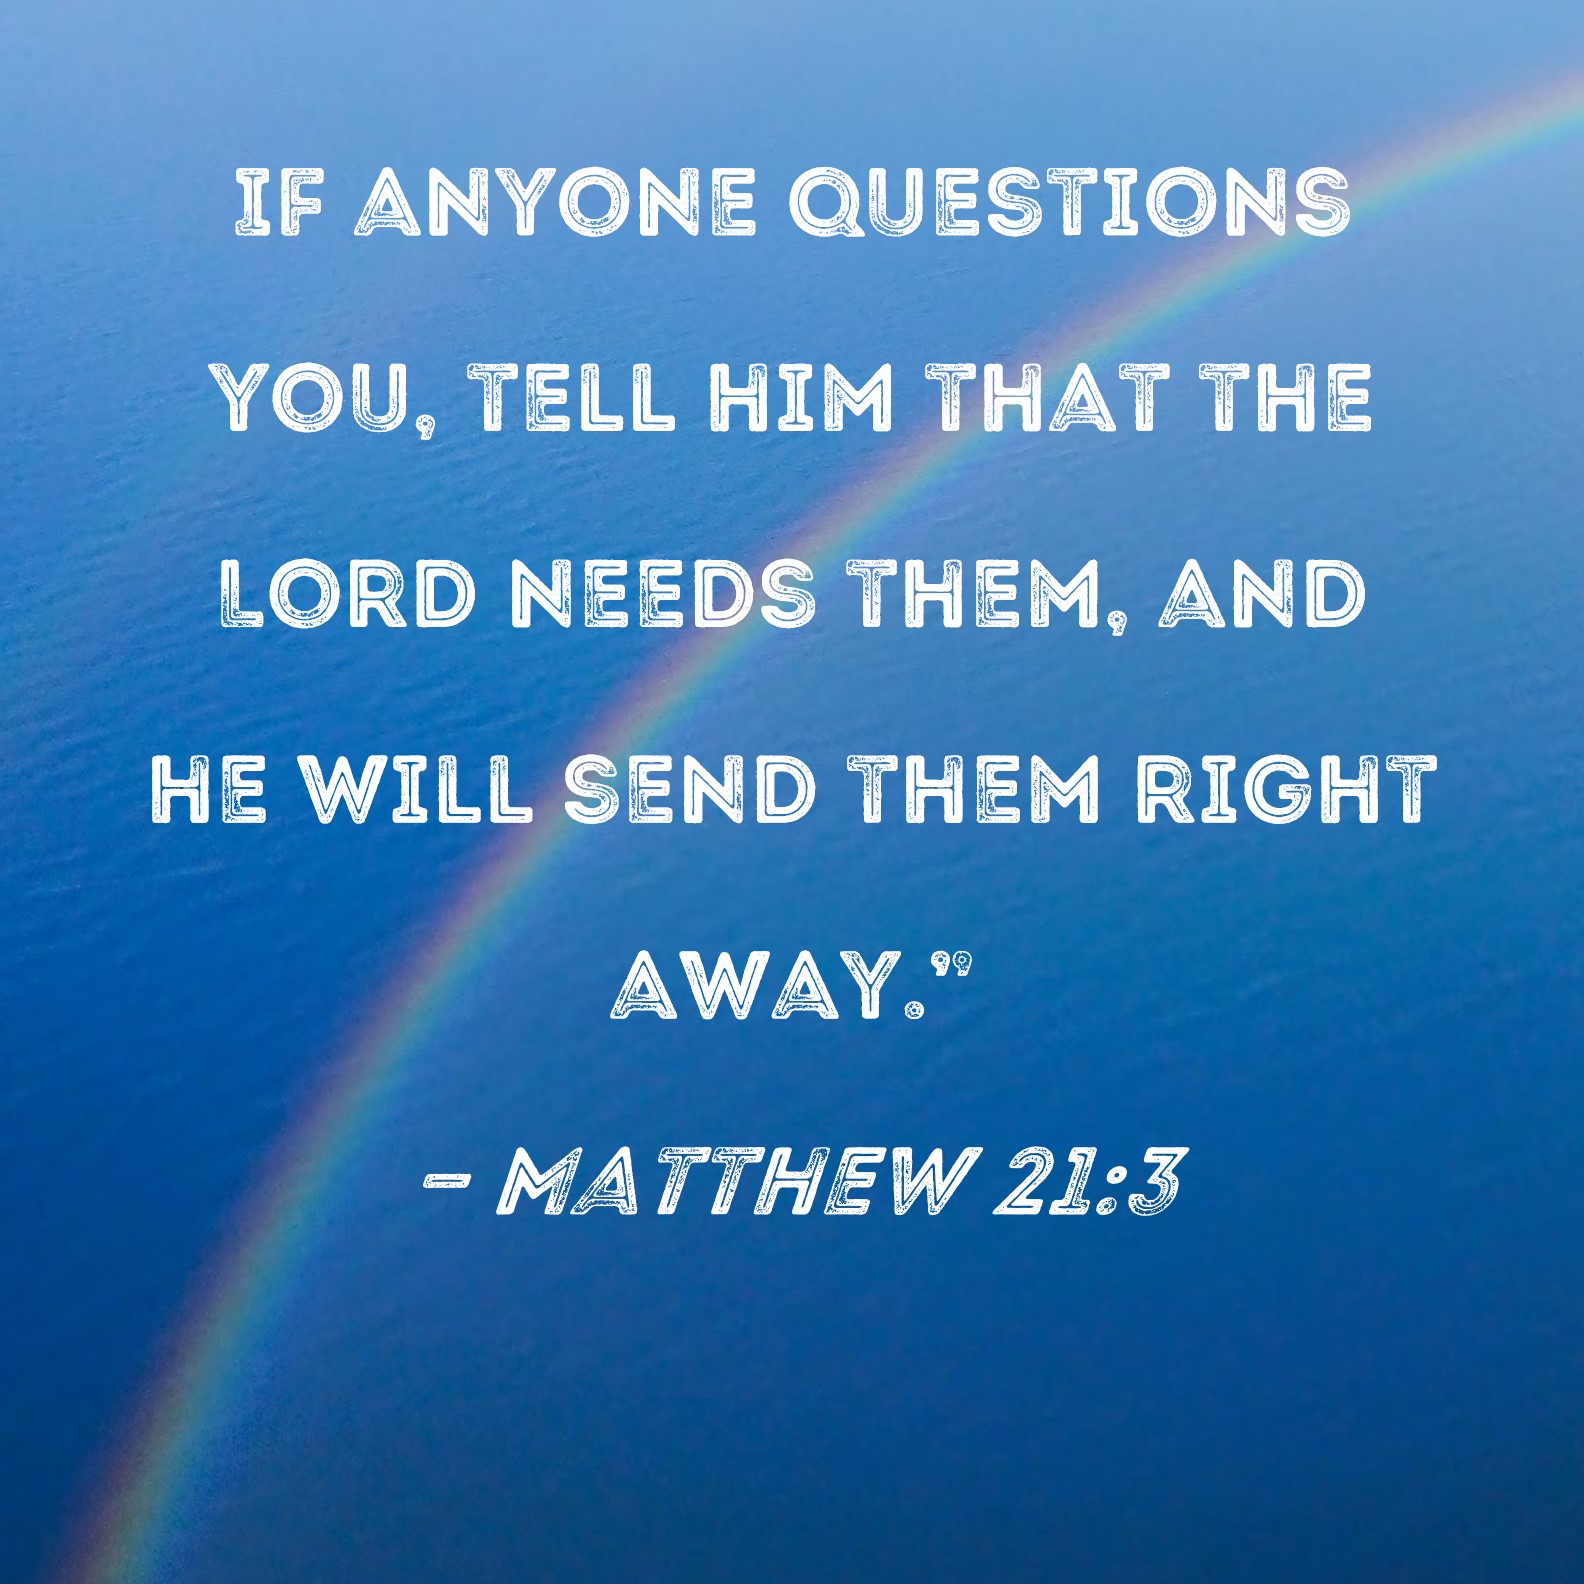 Matthew 21:3 If anyone questions you, tell him that the Lord needs them,  and he will send them right away."